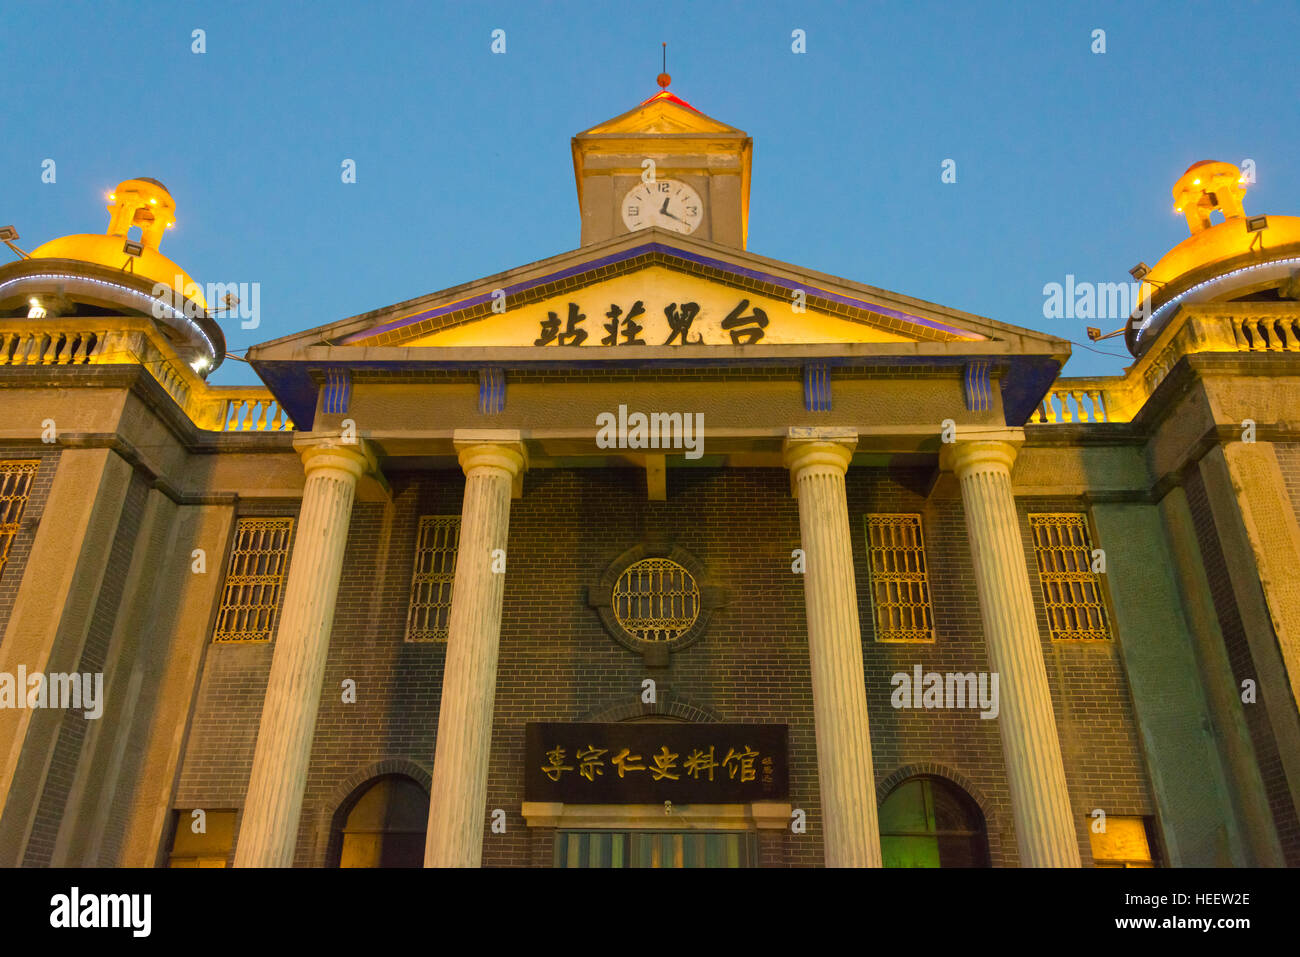 Taierzhuang Station, Shandong Province, China Stock Photo